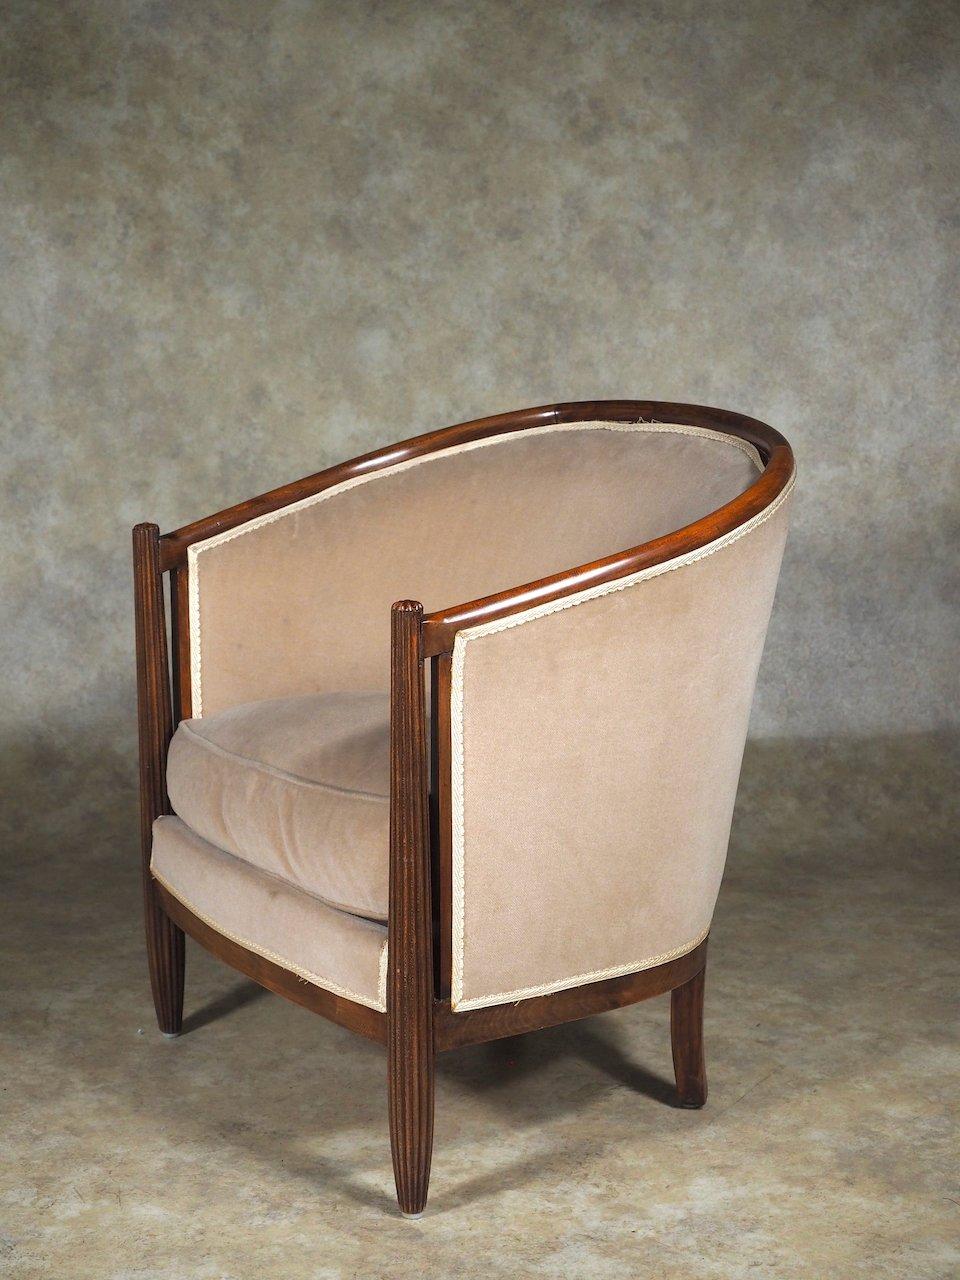 French Art Deco single round-backed club chair by Dominique, circa 1925, in mahogany. 25” wide x 23” deep x 29” high.

DOMINIQUE
From a 1929 French exhibition catalog 